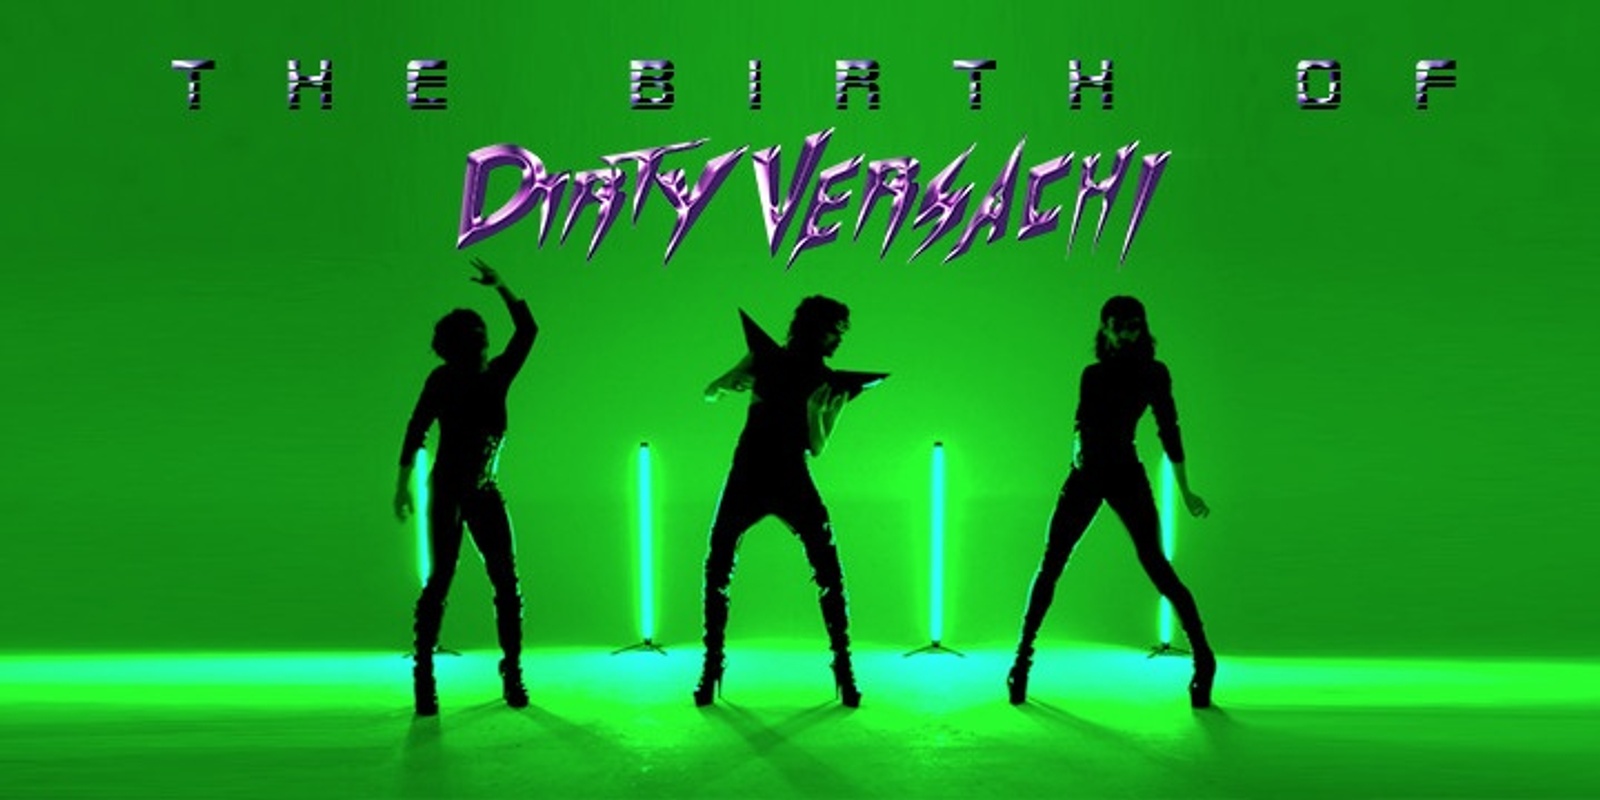 Banner image for The Birth of Dirty Versachi